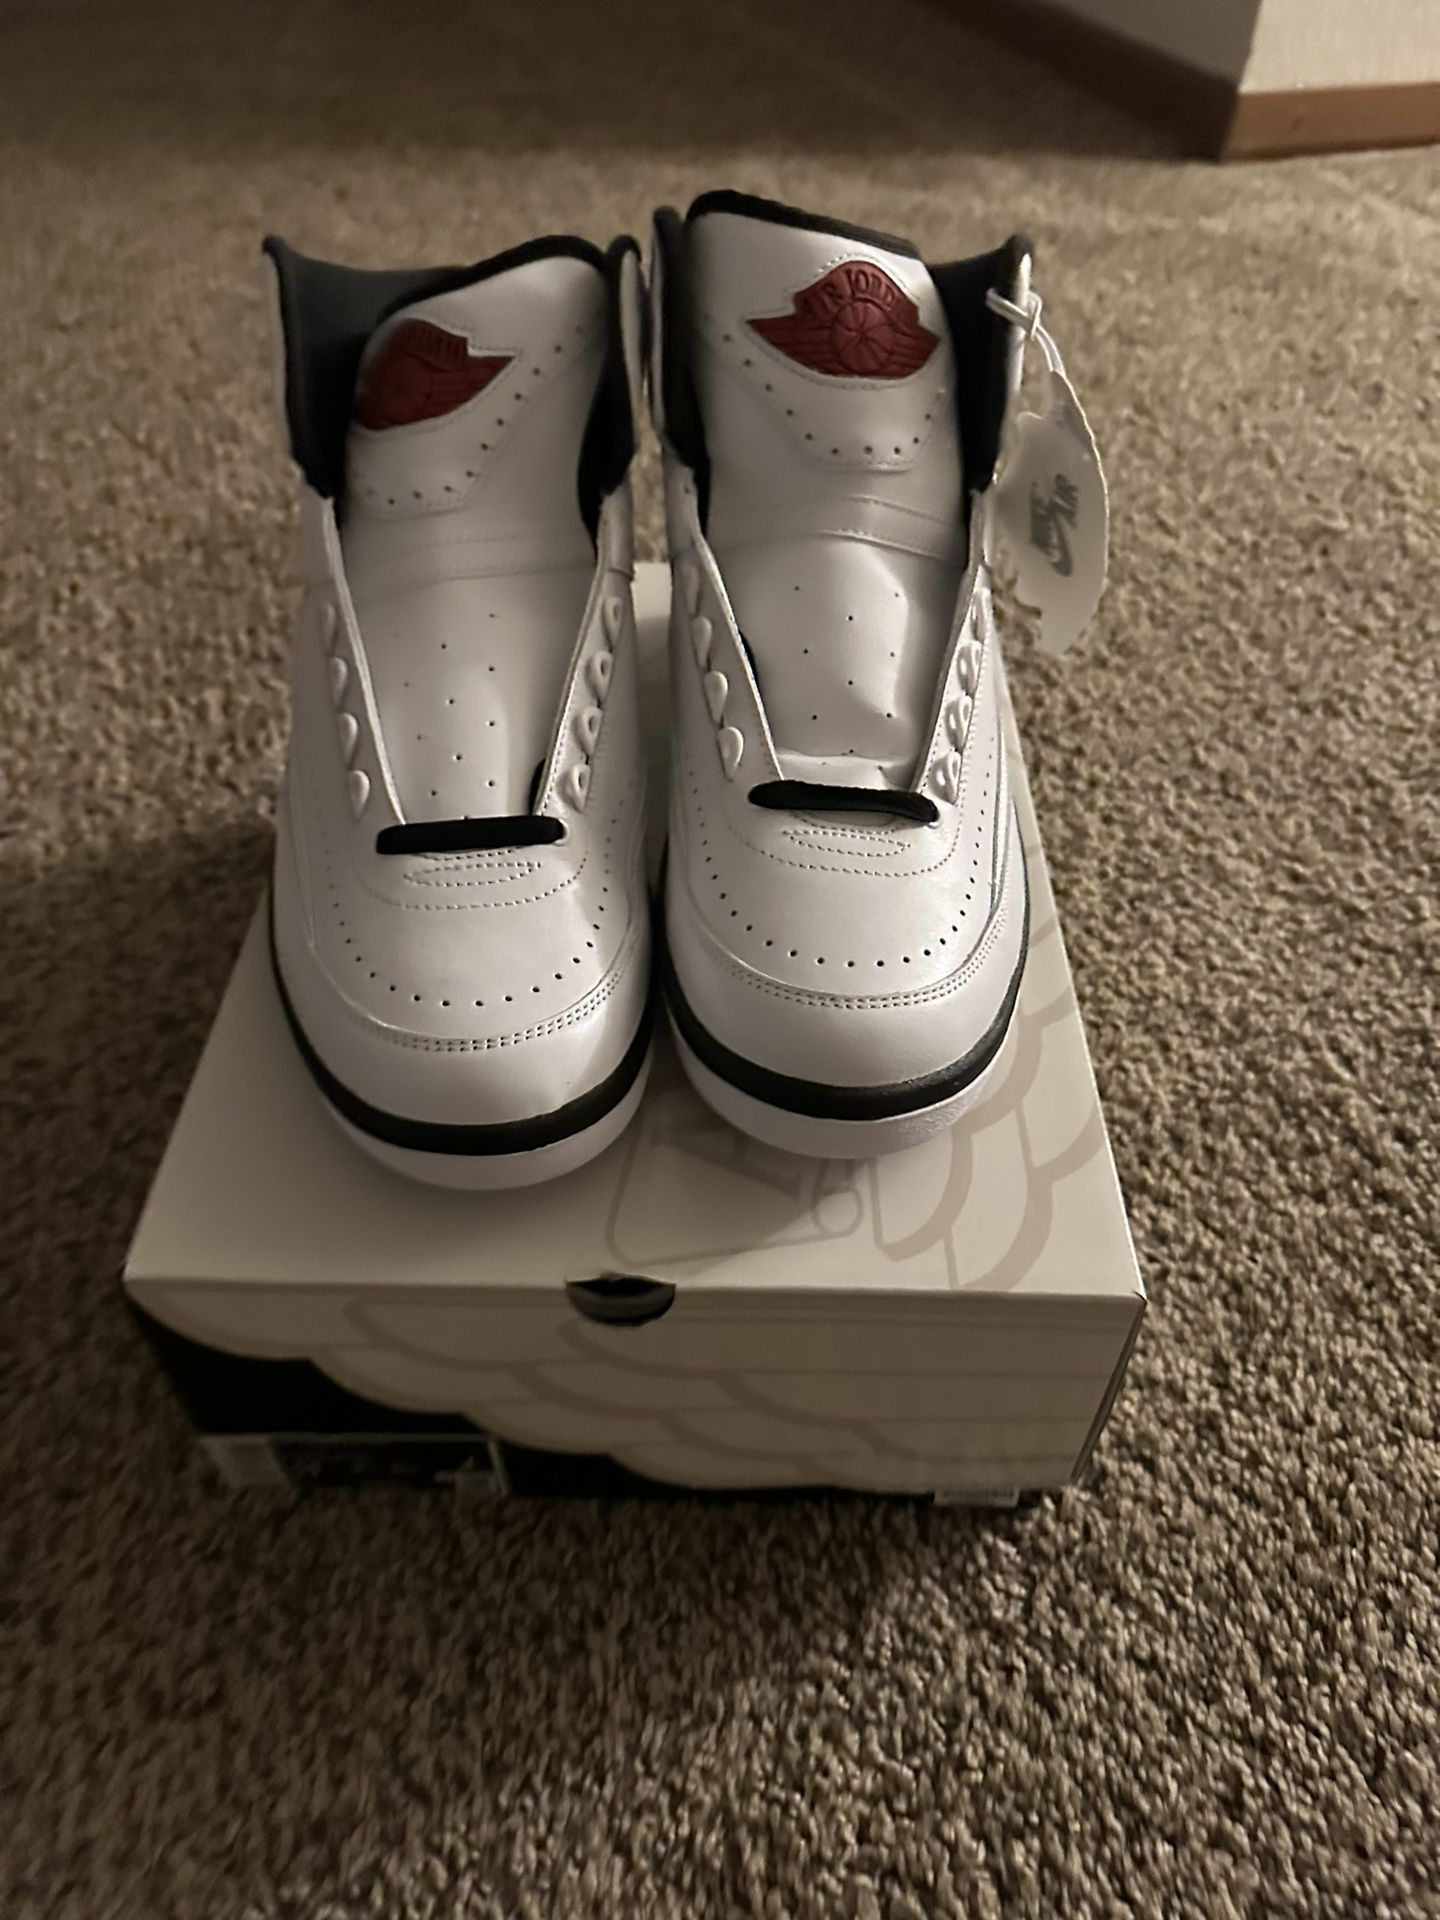 Retro Jordan 2s  (Brand New never Even Laced Up Size 11)